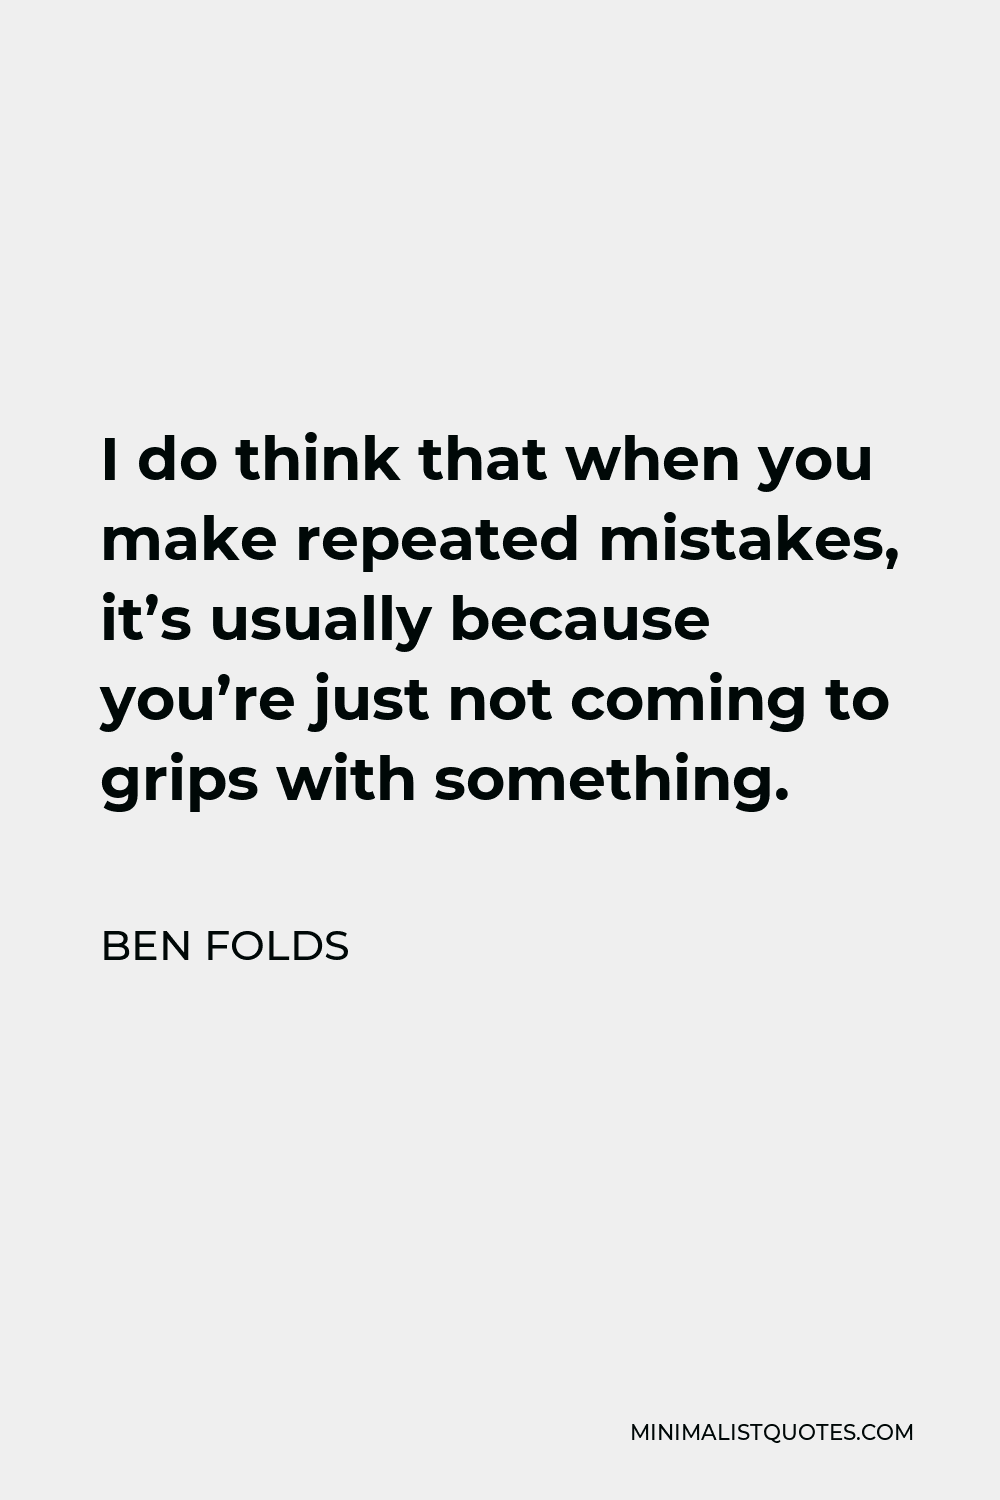 Ben Folds Quote - I do think that when you make repeated mistakes, it’s usually because you’re just not coming to grips with something.